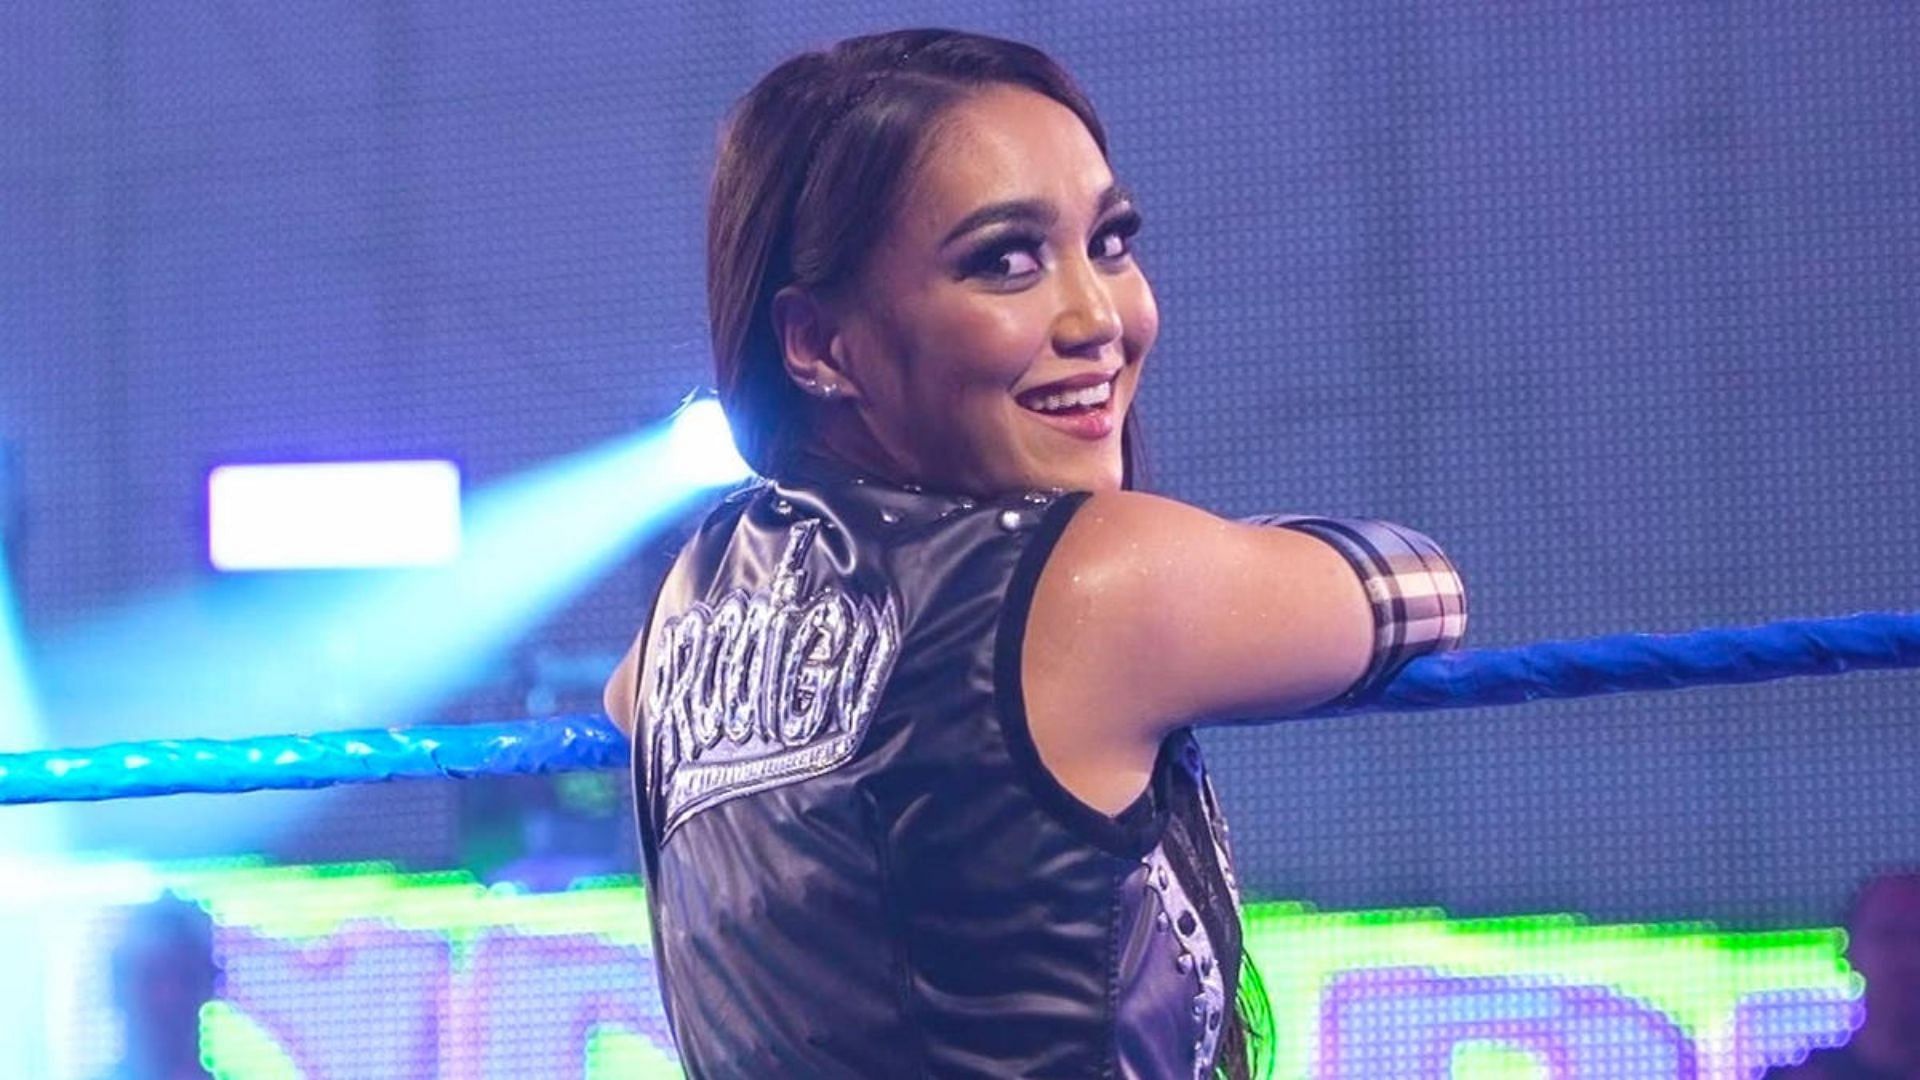 Roxanne Perez is one of wrestling&#039;s brightest young stars